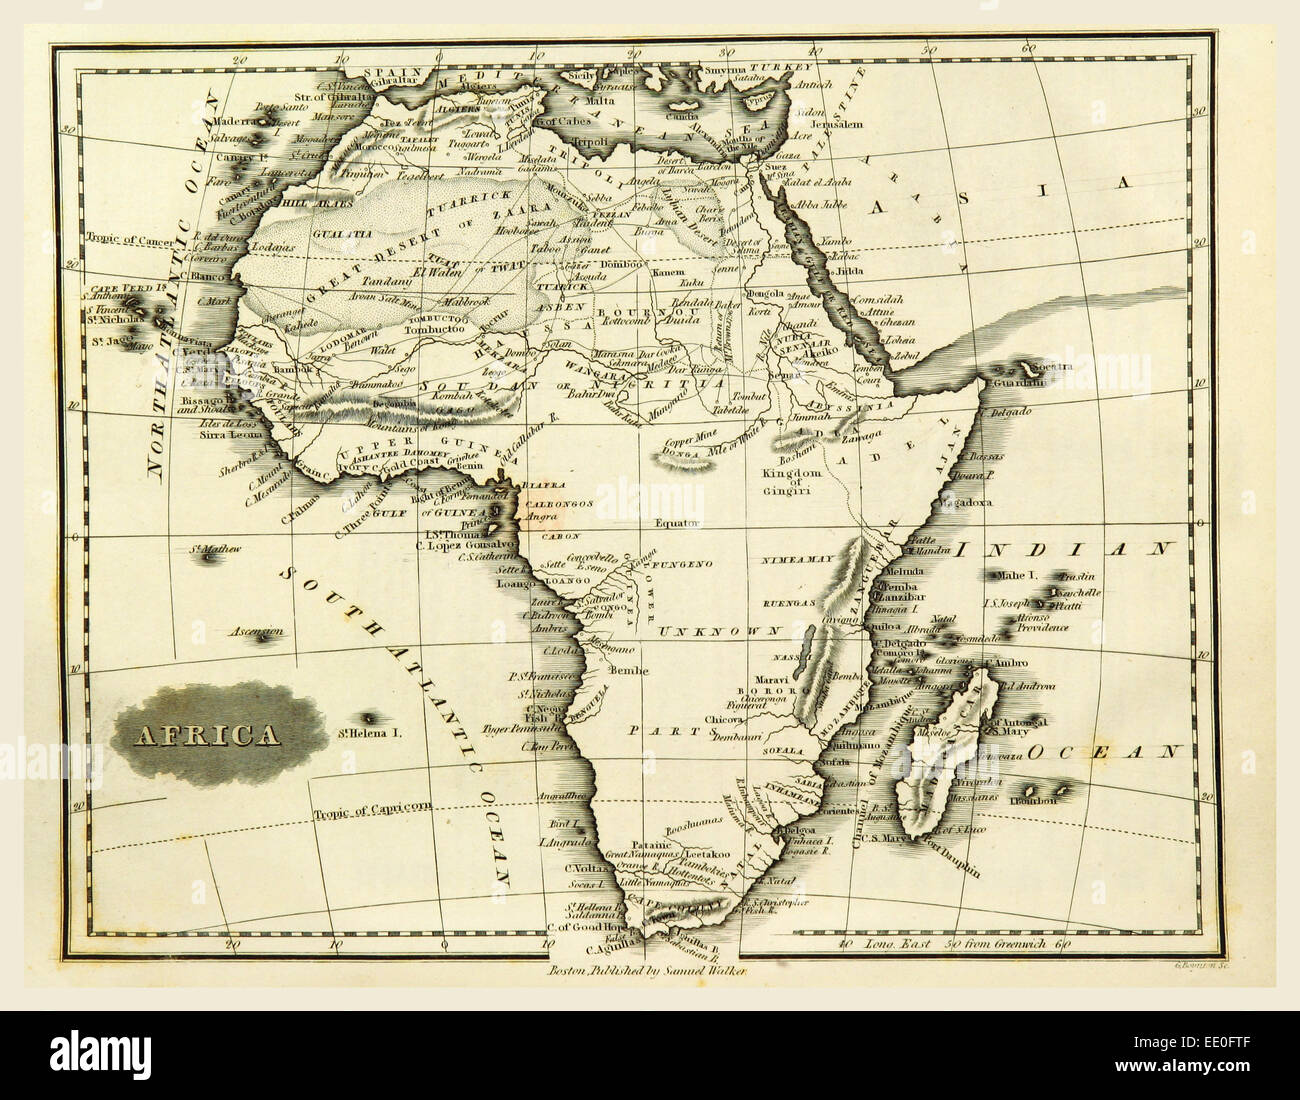 Map Africa, 19th century engraving Stock Photo